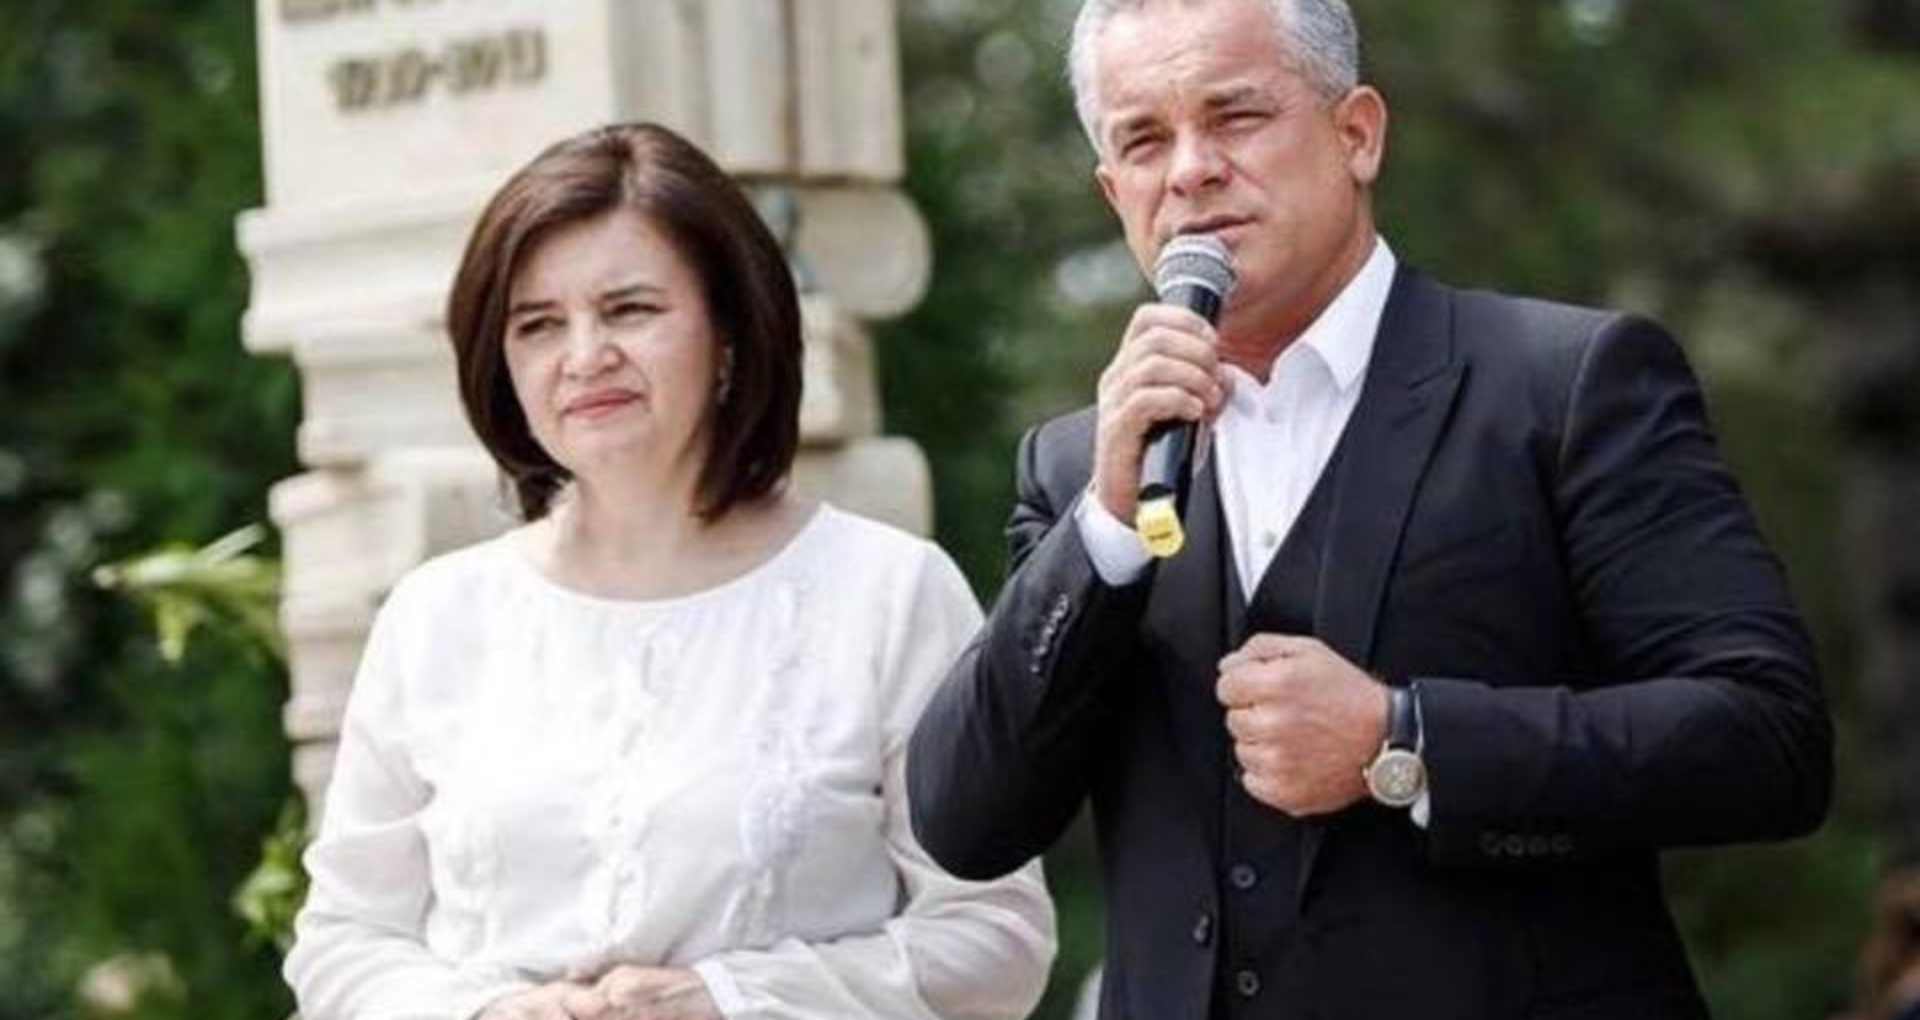 Monica Babuc, who was loyal to Plahotniuc, could lead the Romanian Cultural Institute in Chisinau